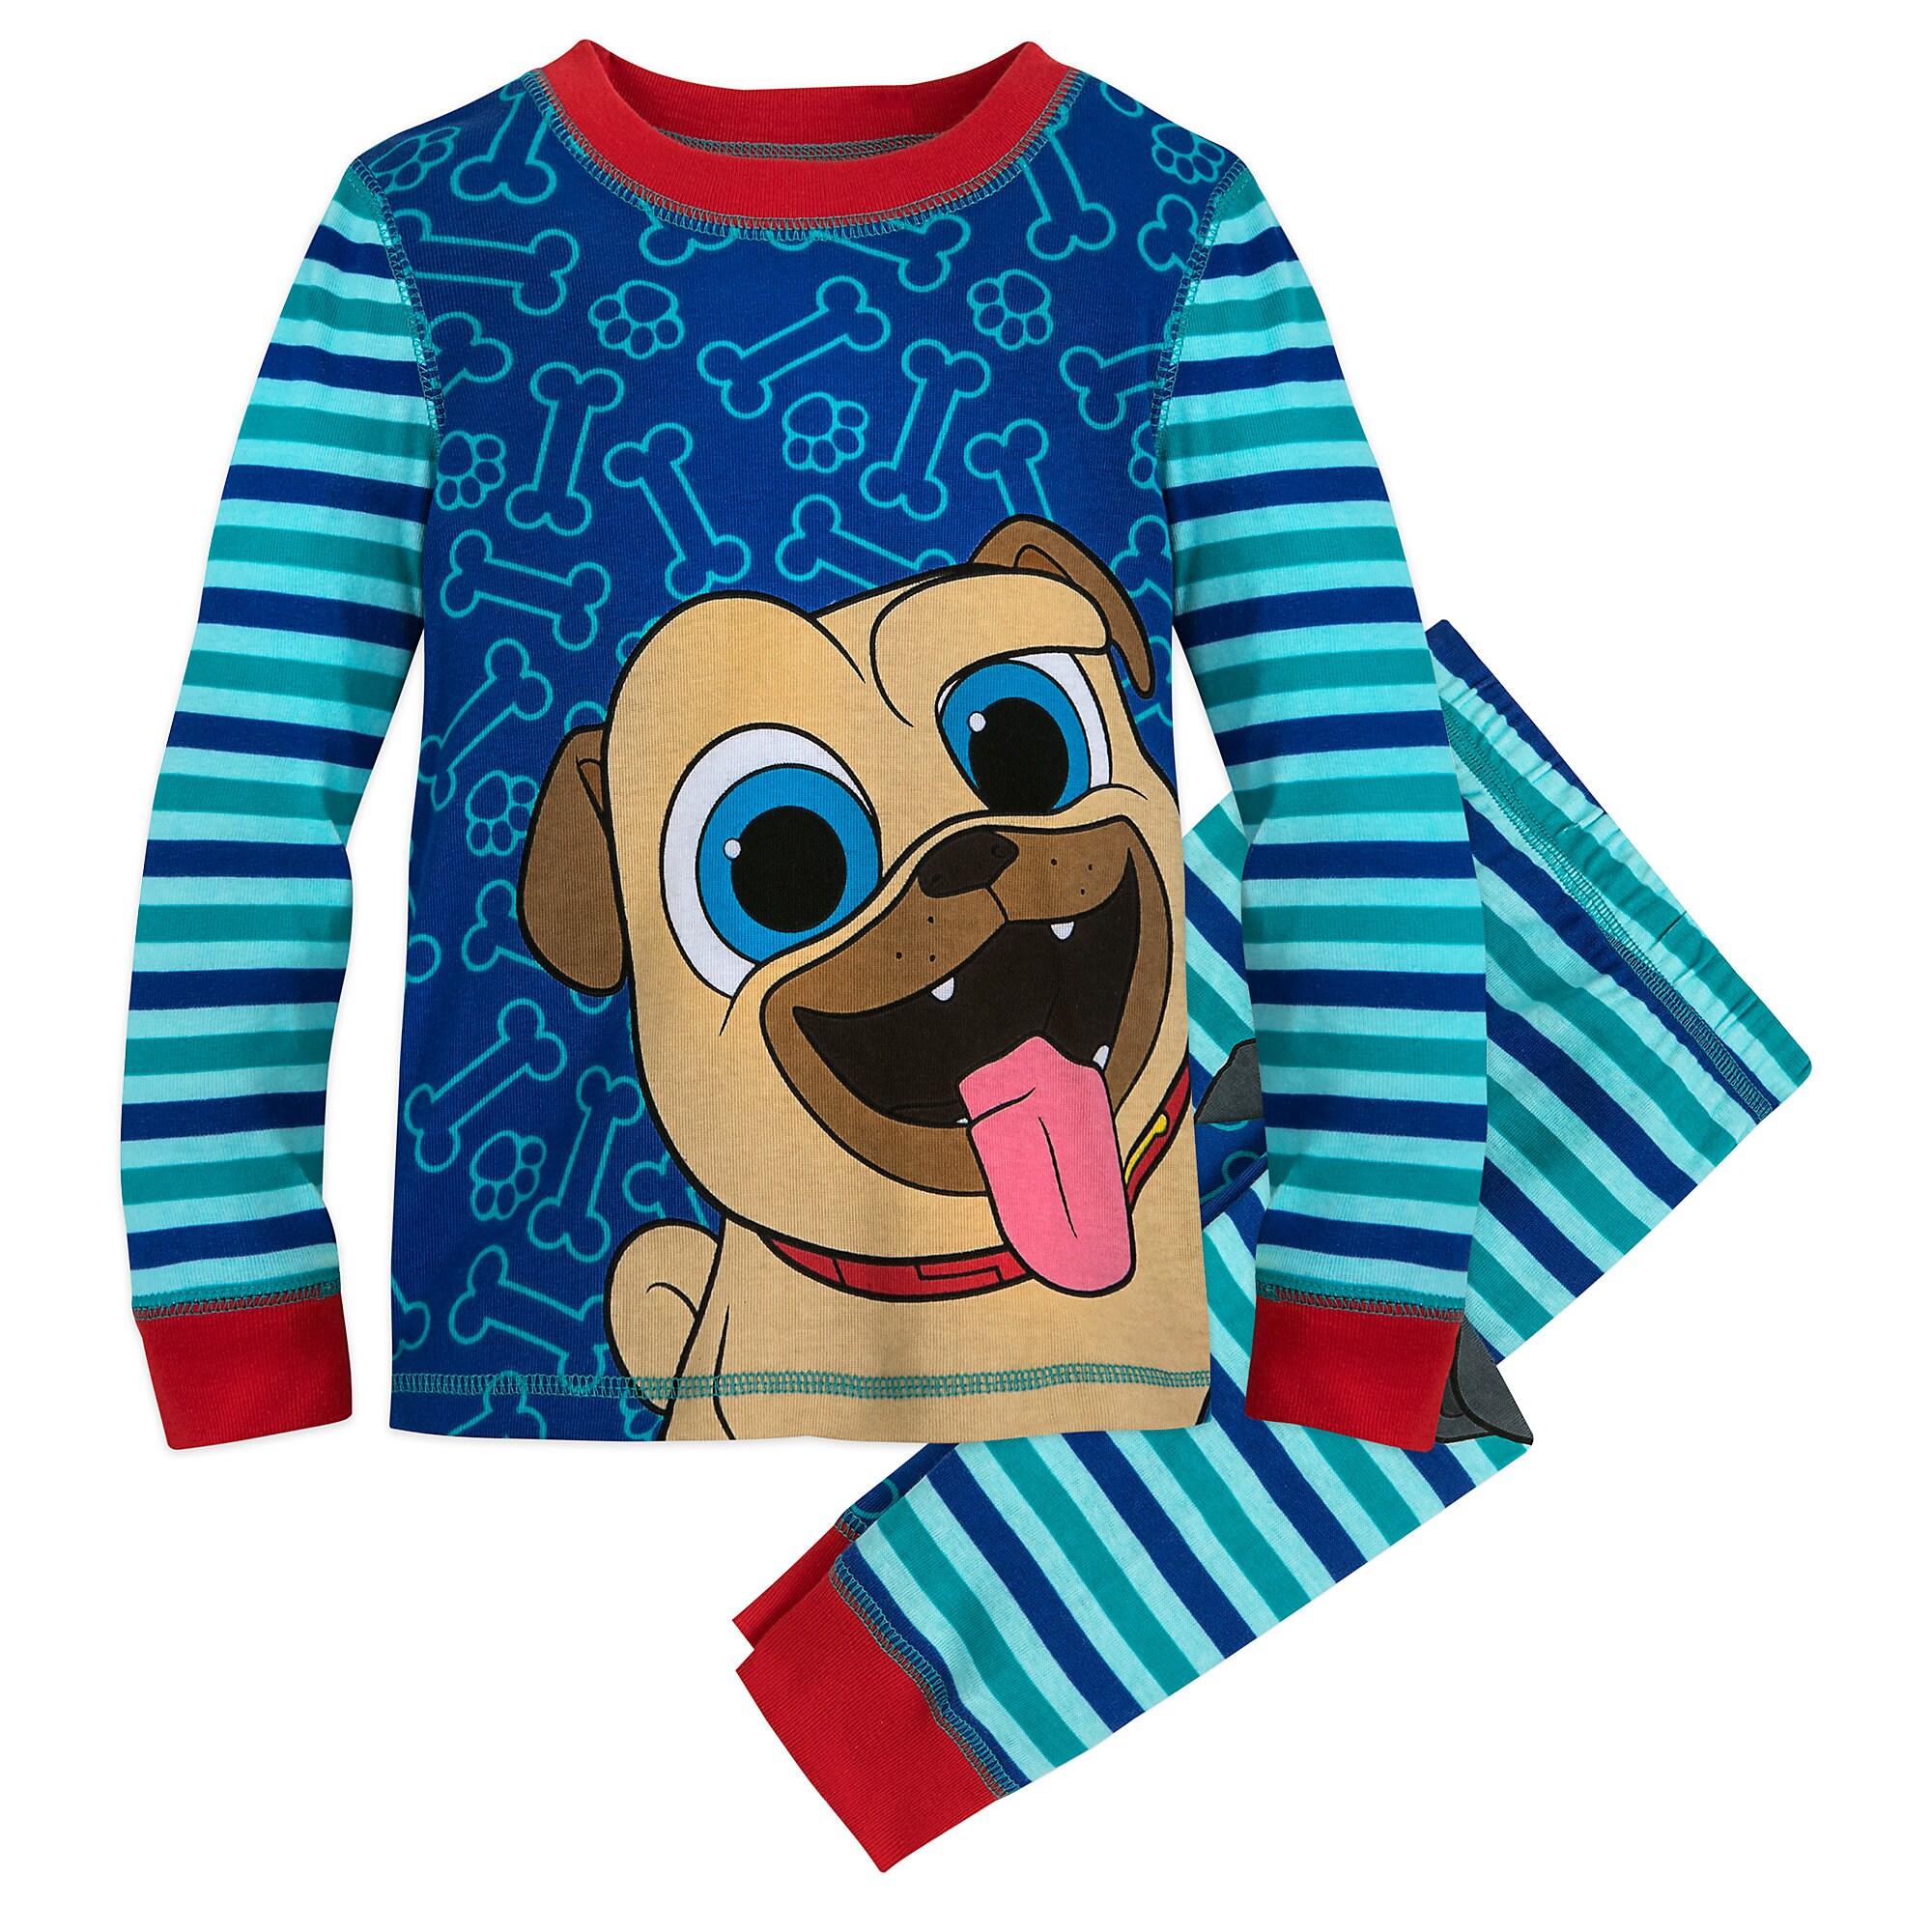 Rolly and Bingo PJ PALS for Boys - Puppy Dog Pals